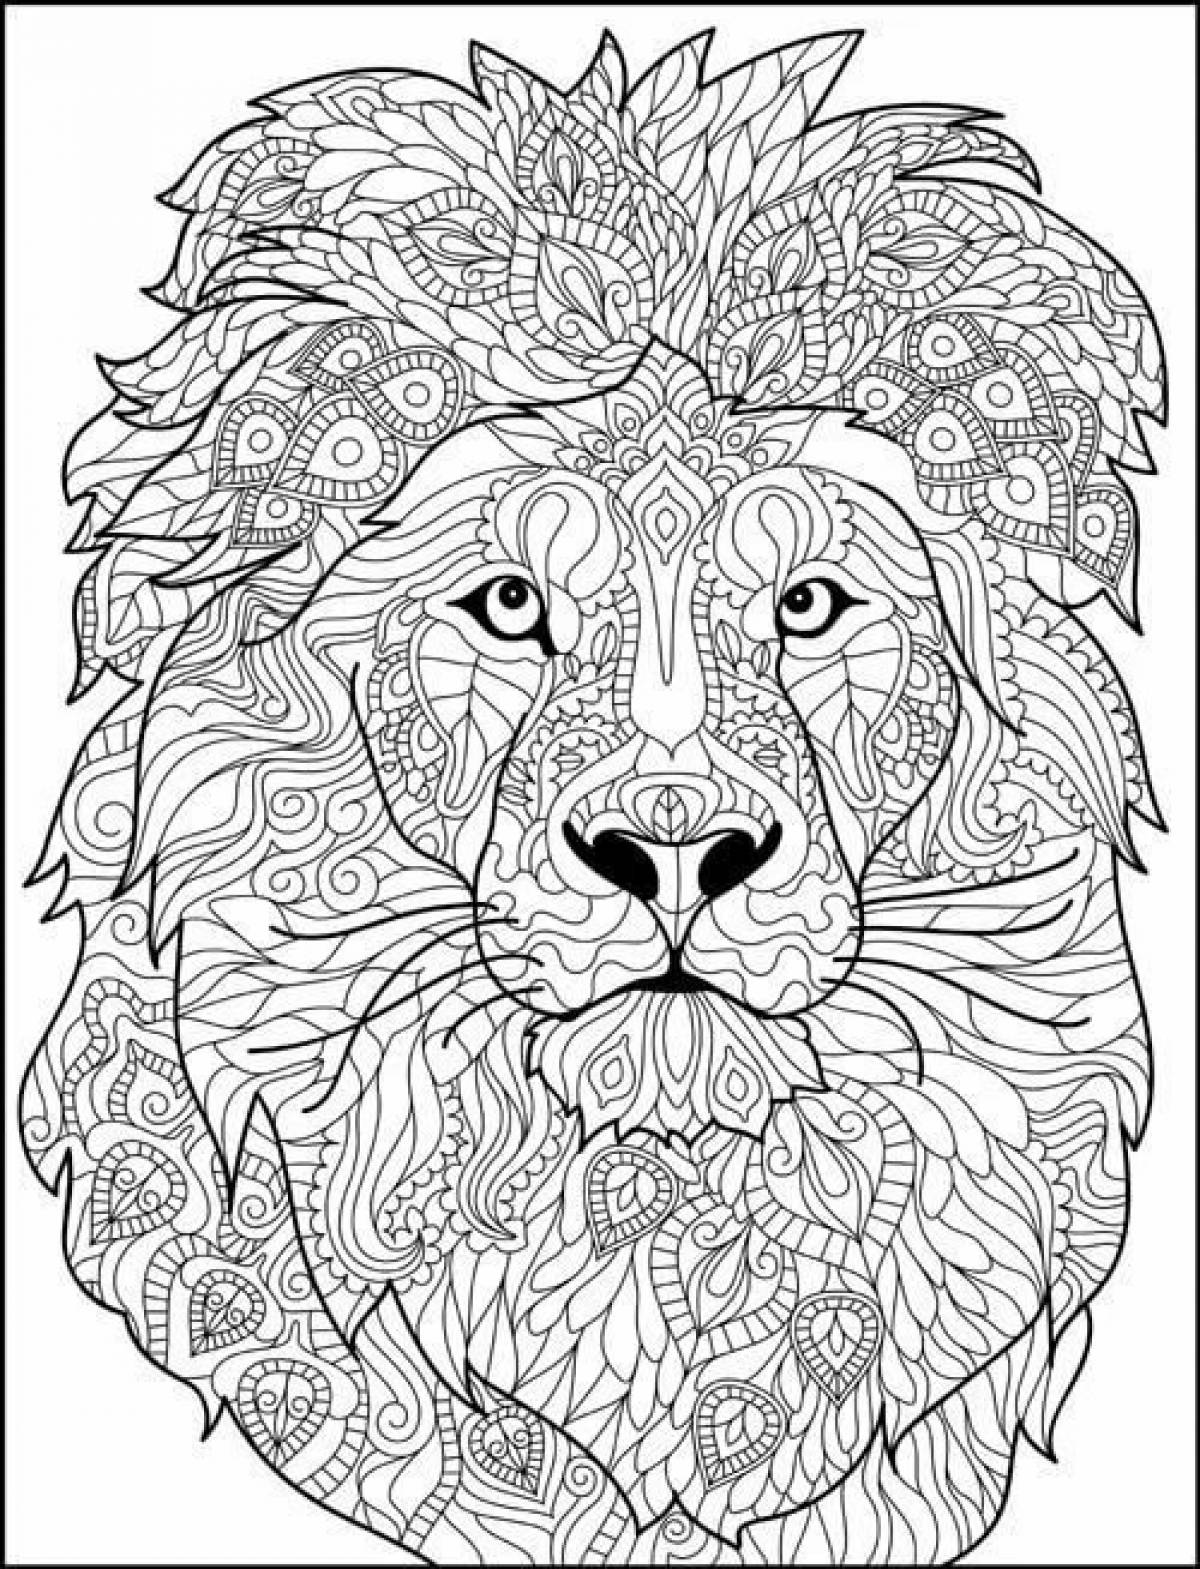 Sophisticated antistress lion head